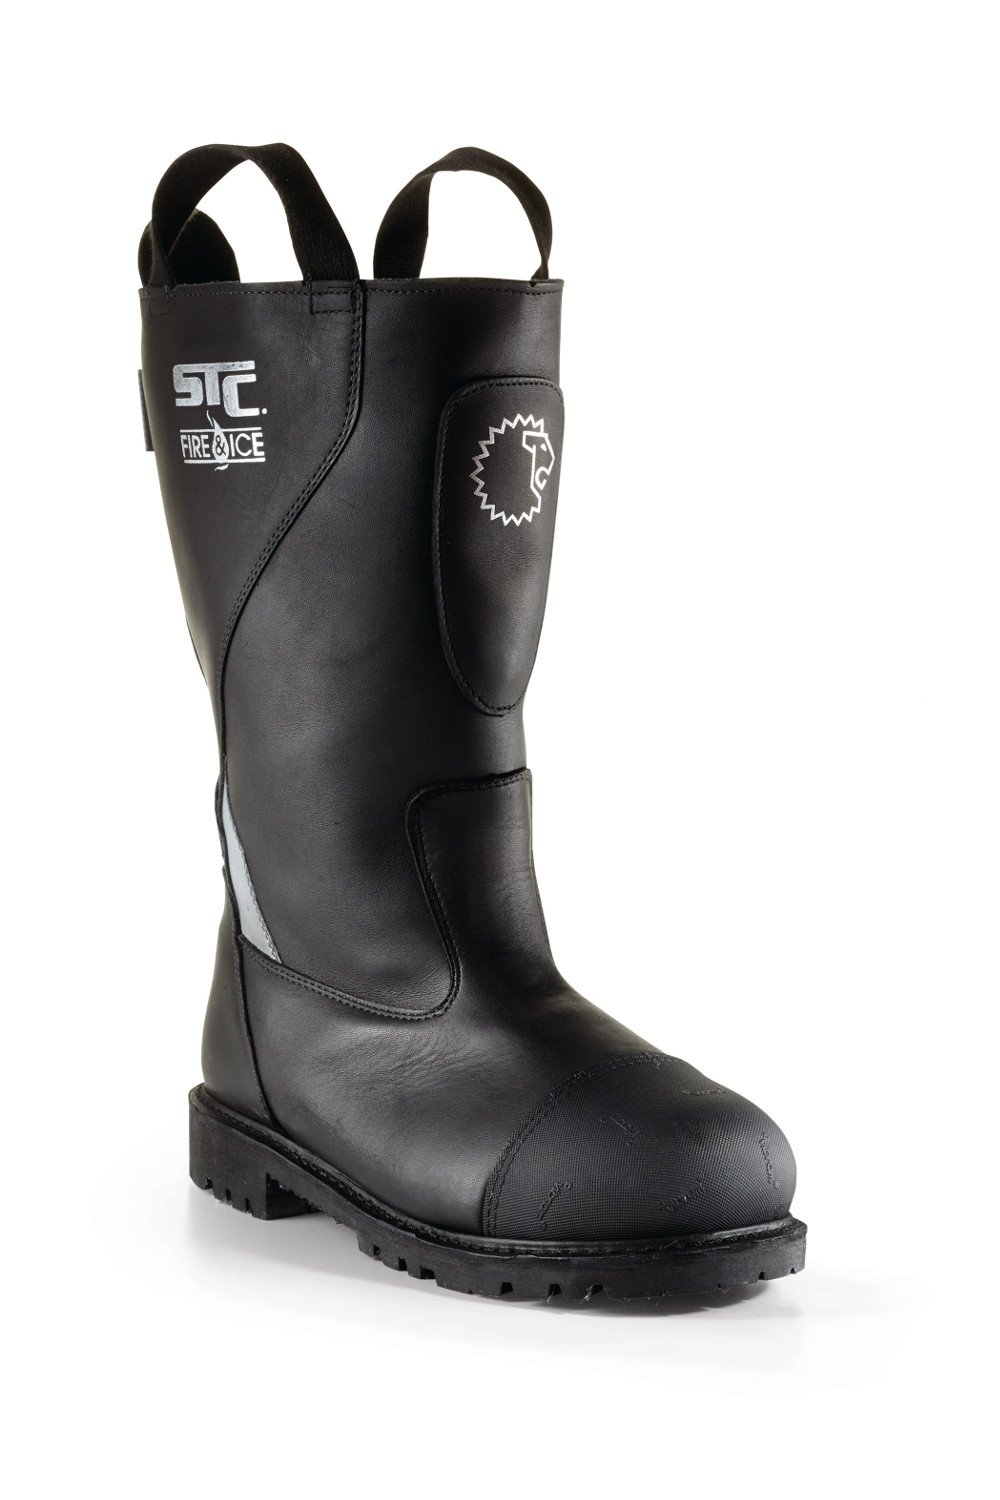 RUGGED STRUCTURAL FIREFIGHTING BOOTS